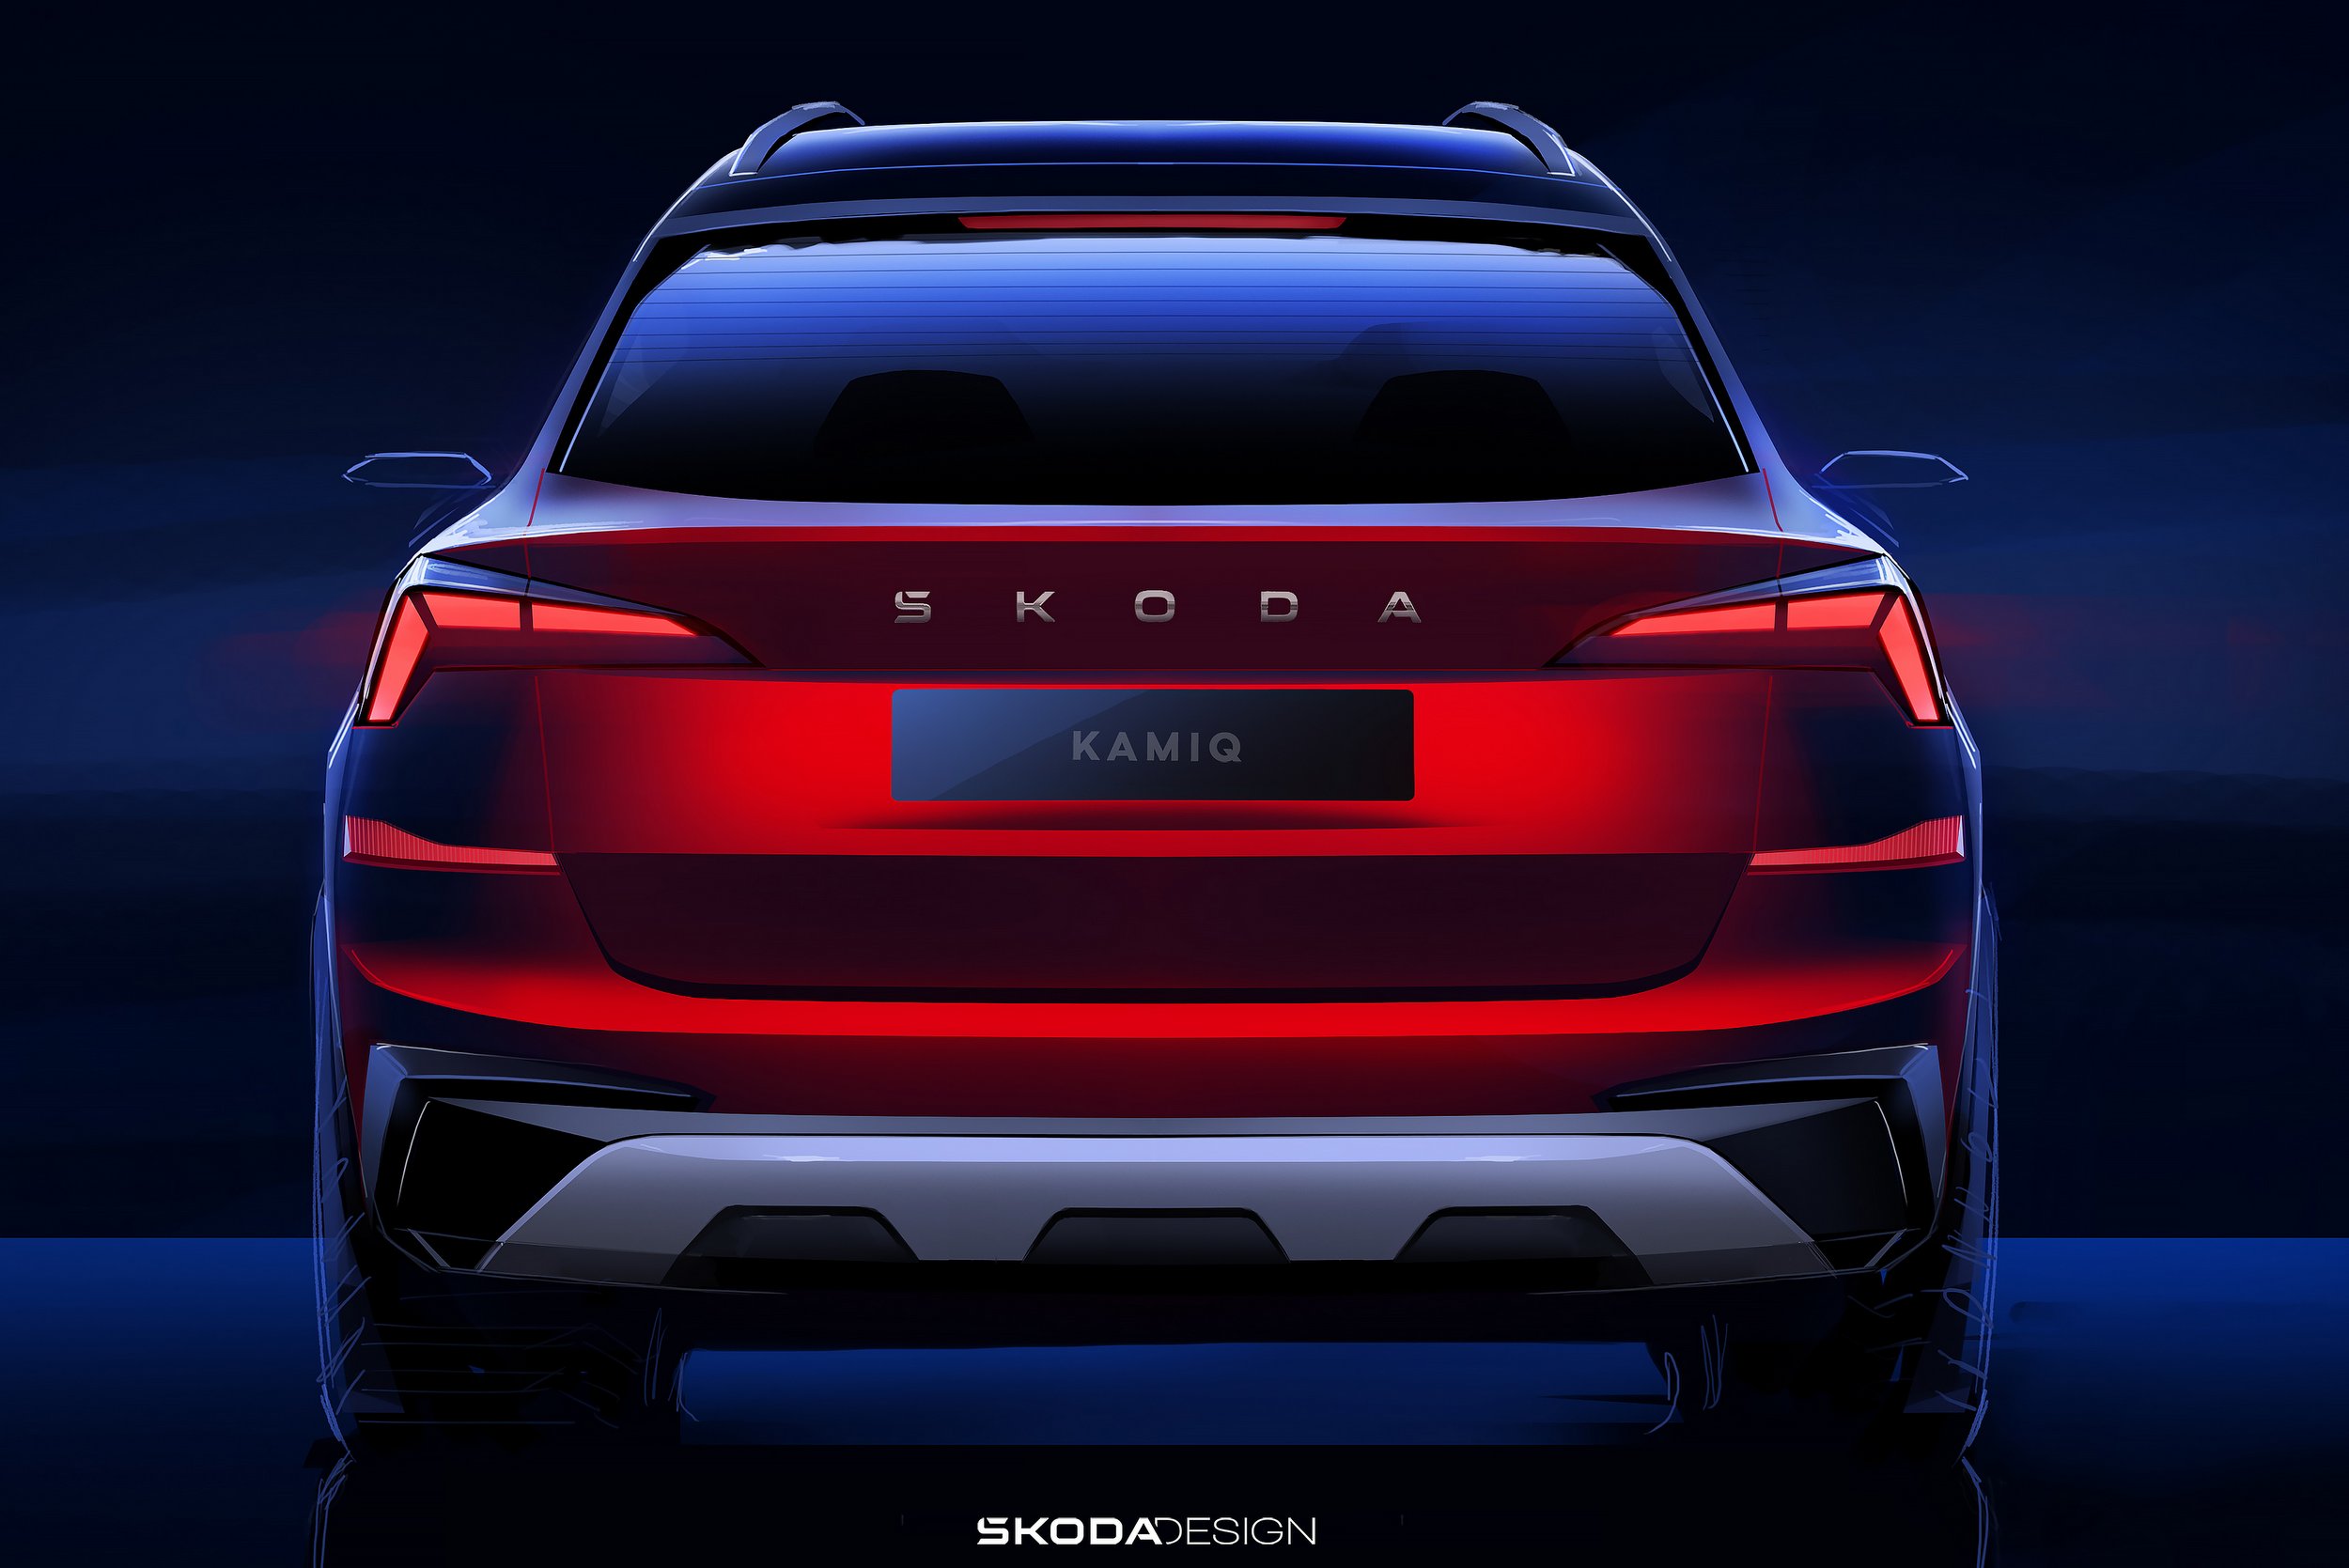 Skoda 5 details its compacts again